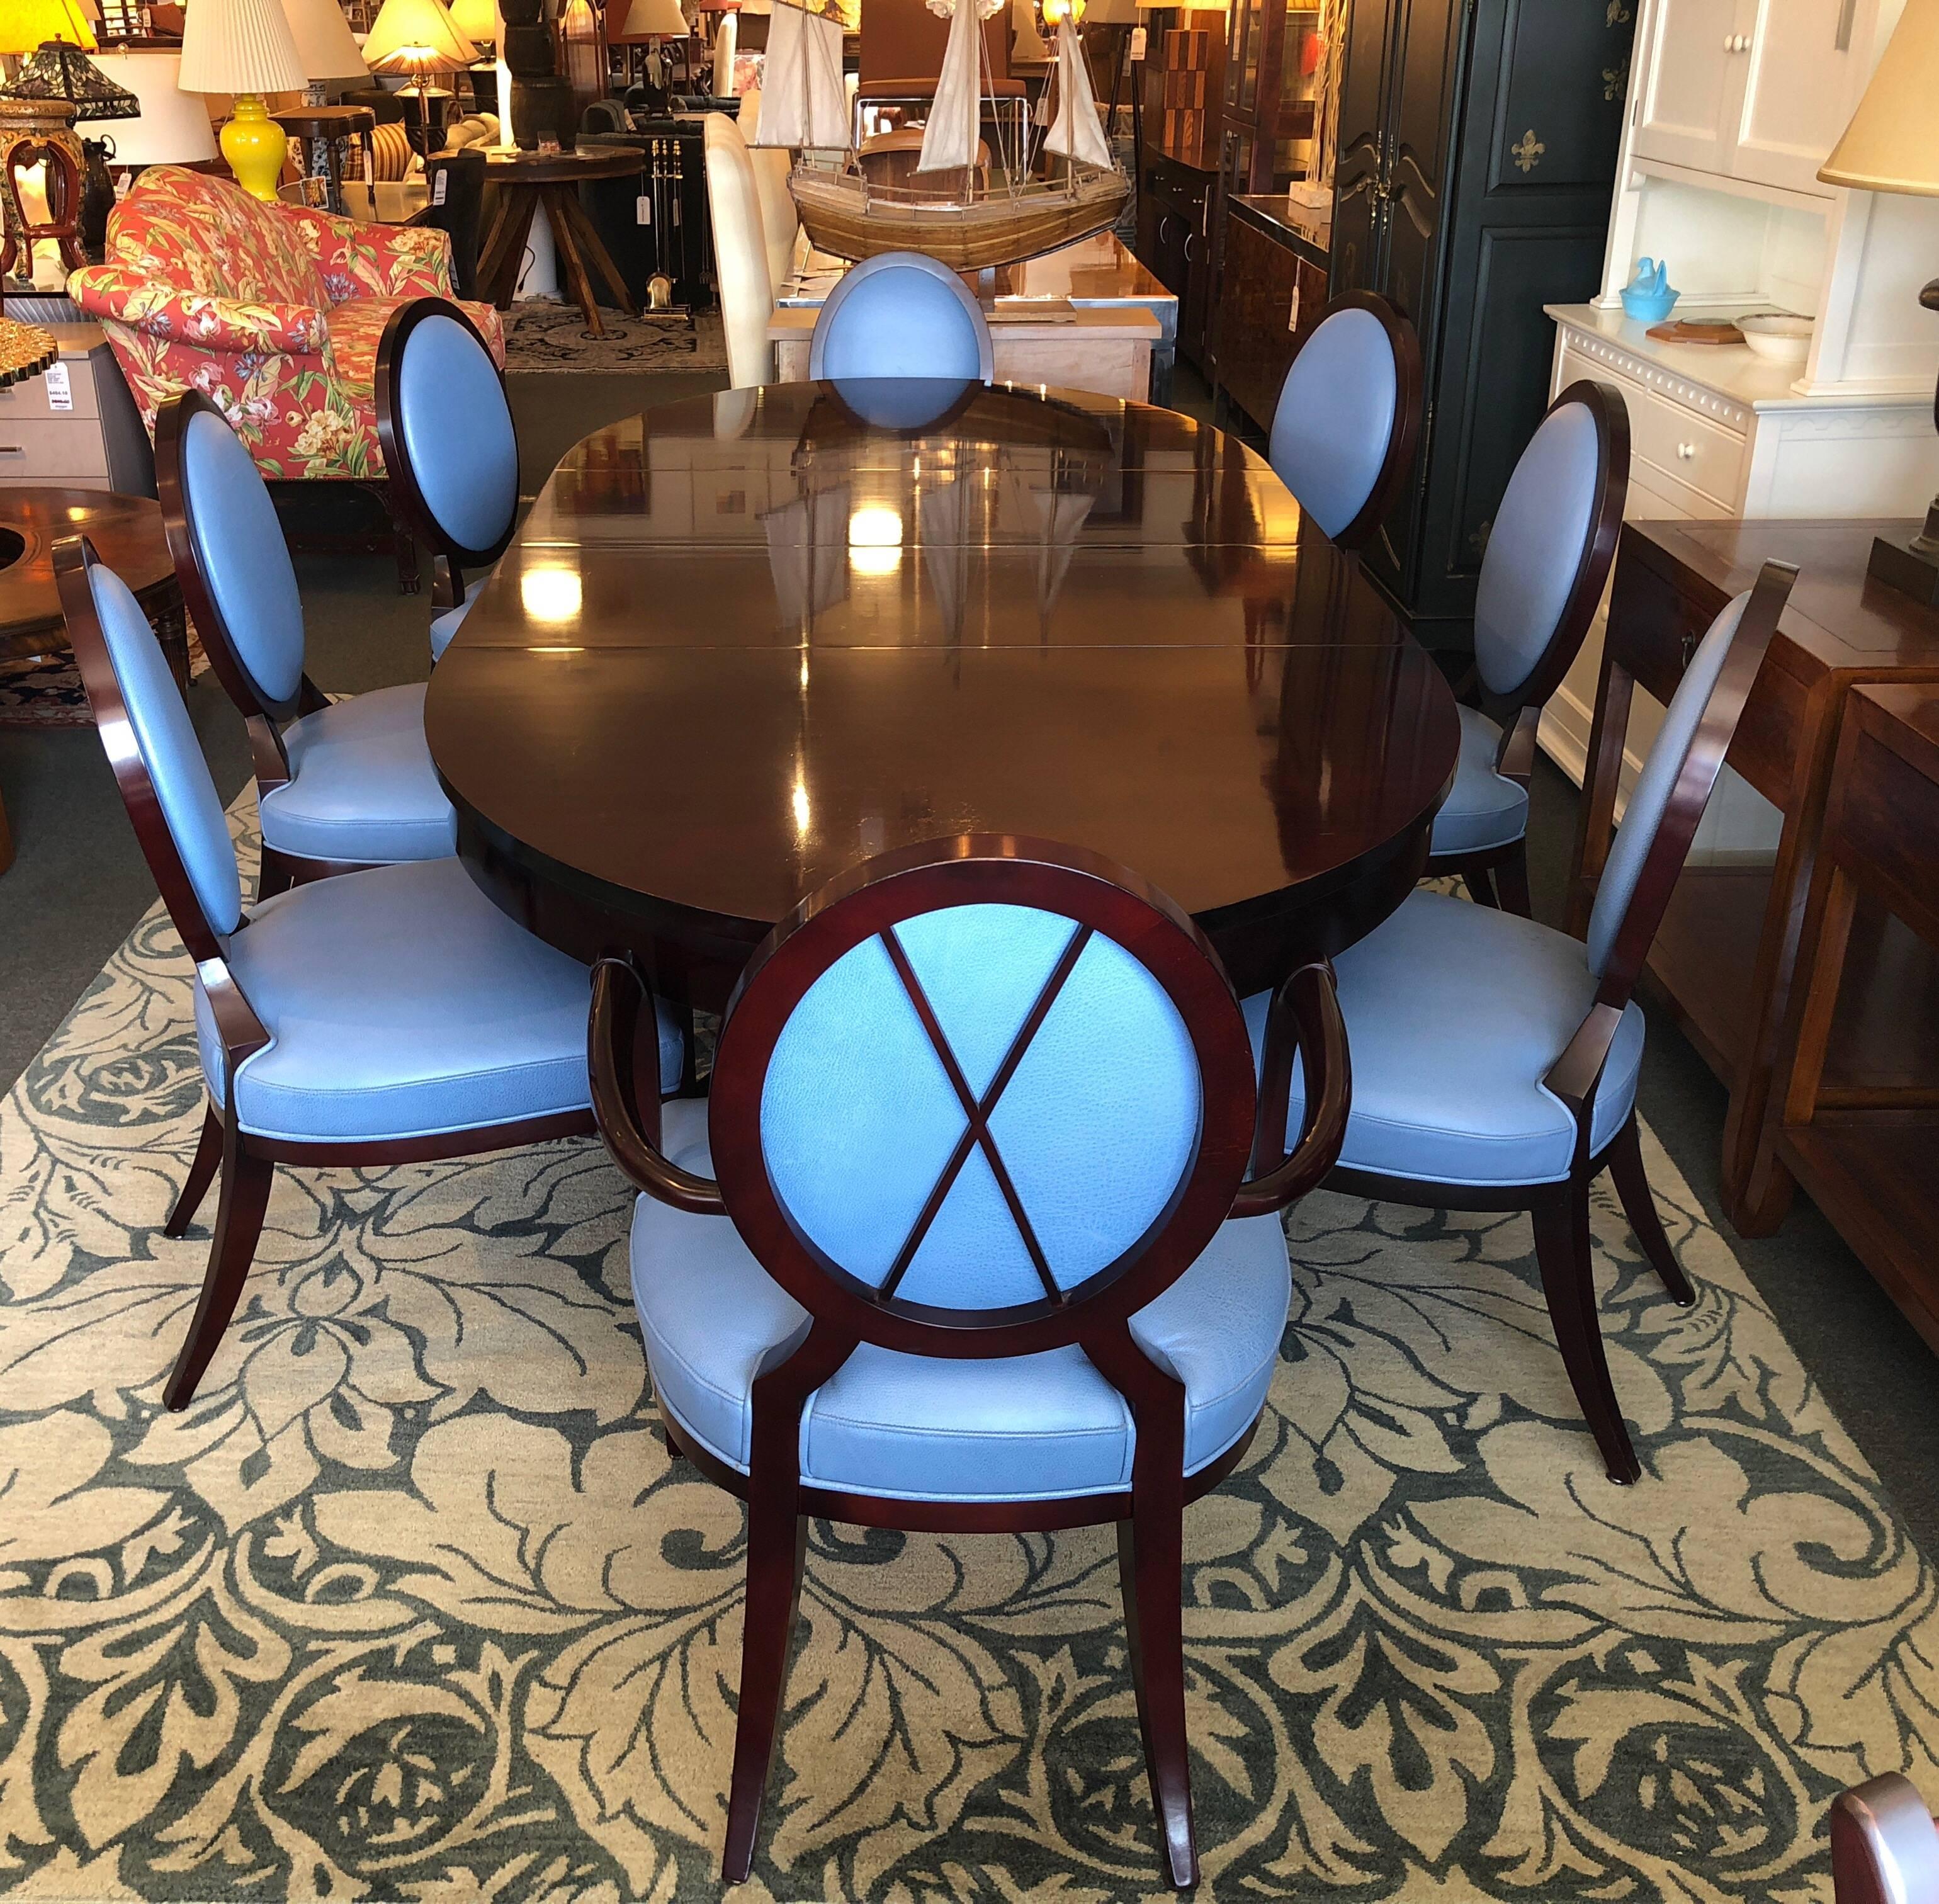 A fabulous dining set designed by Barbara Barry for Baker Furniture. The oval table as well as the chair frames are mahogany with a gloss finish. There are two arm chairs and six sides, they are upholstered in beautiful top grain Cornflower blue